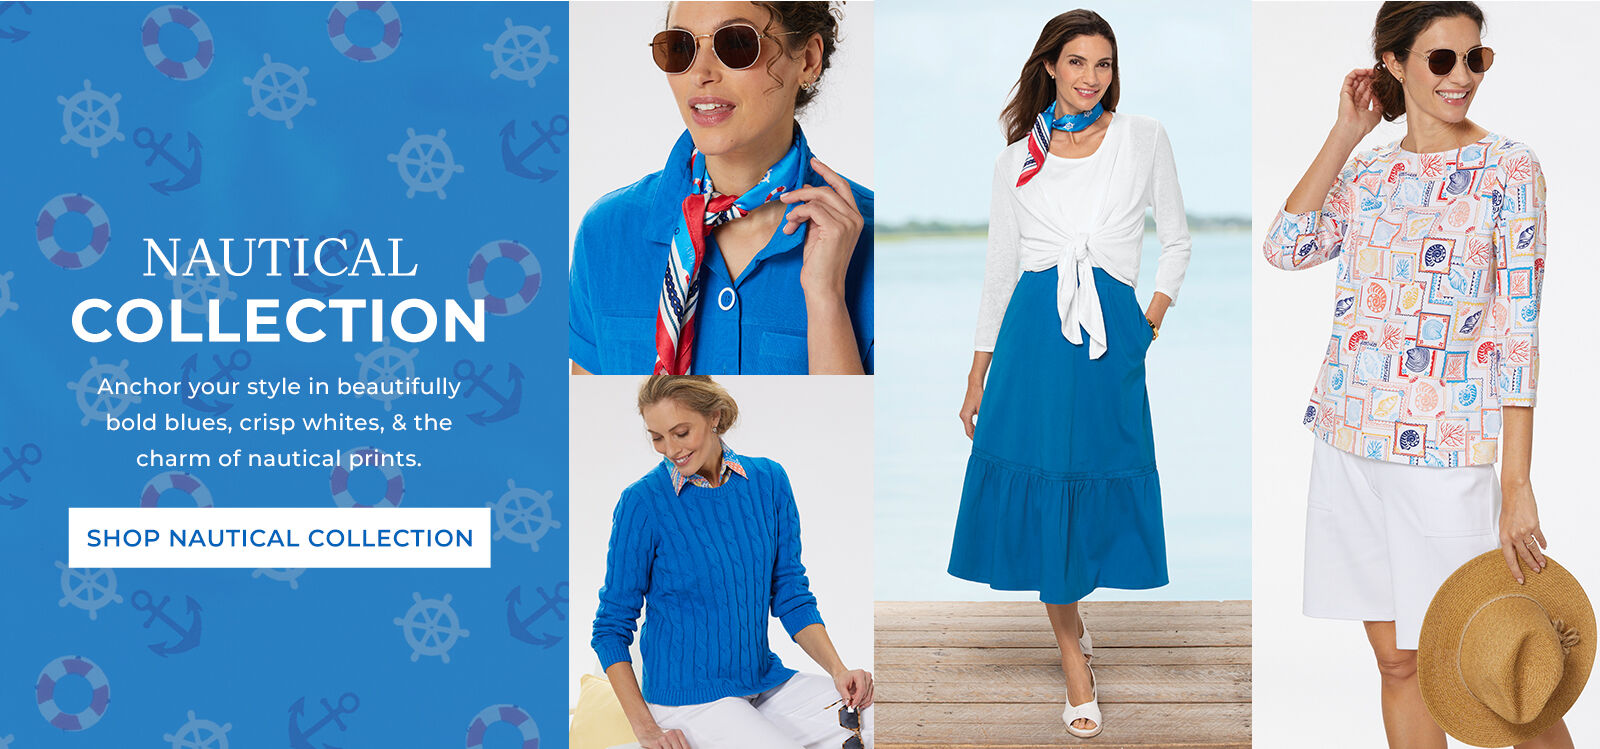 nautical collection anchor your style in beautifully bold blues, crisp whites, & the charm of nautical prints. shop nautical collection